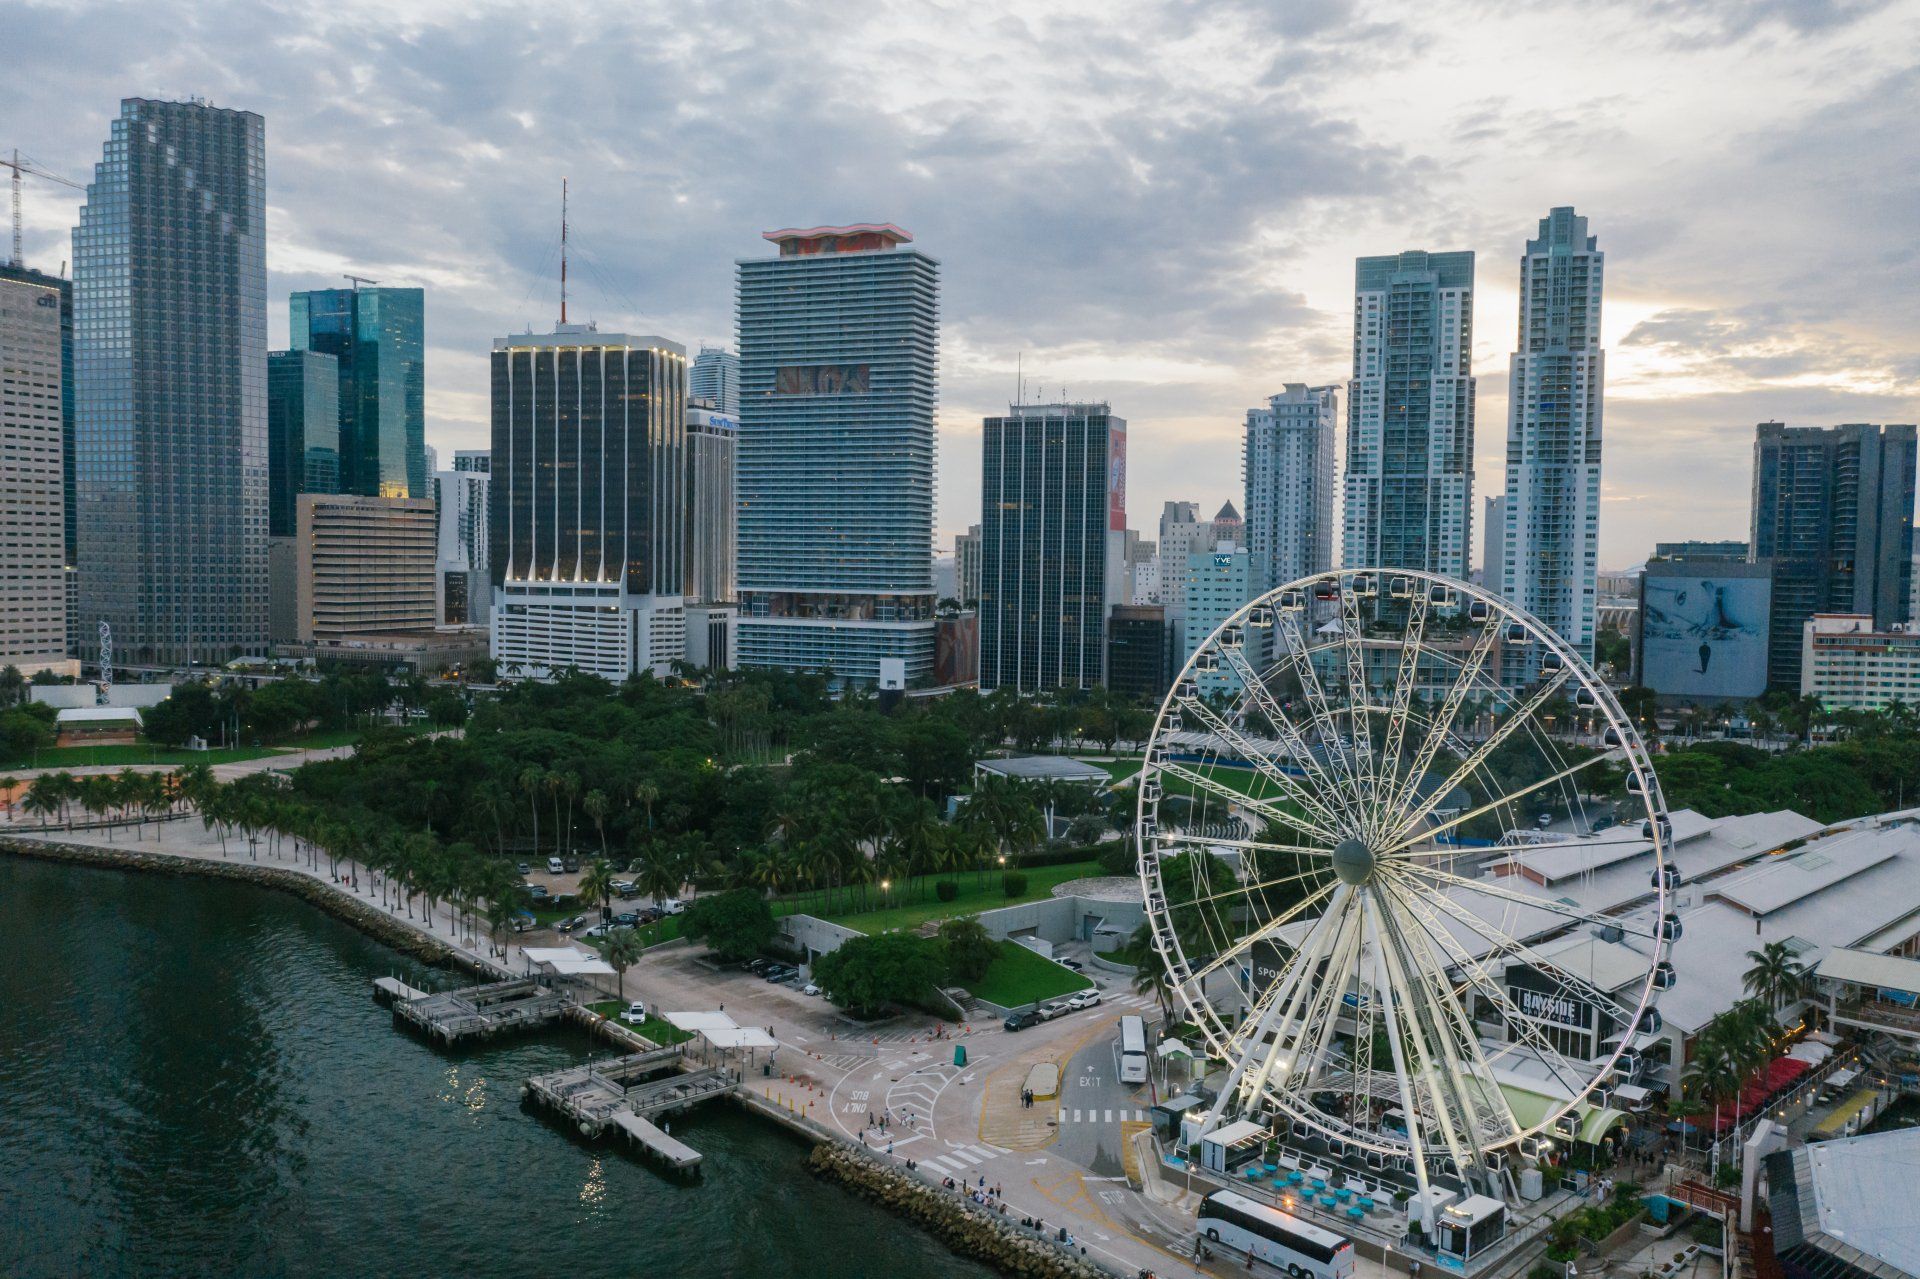 Picture of the Miami skyline with the ferris wheel.